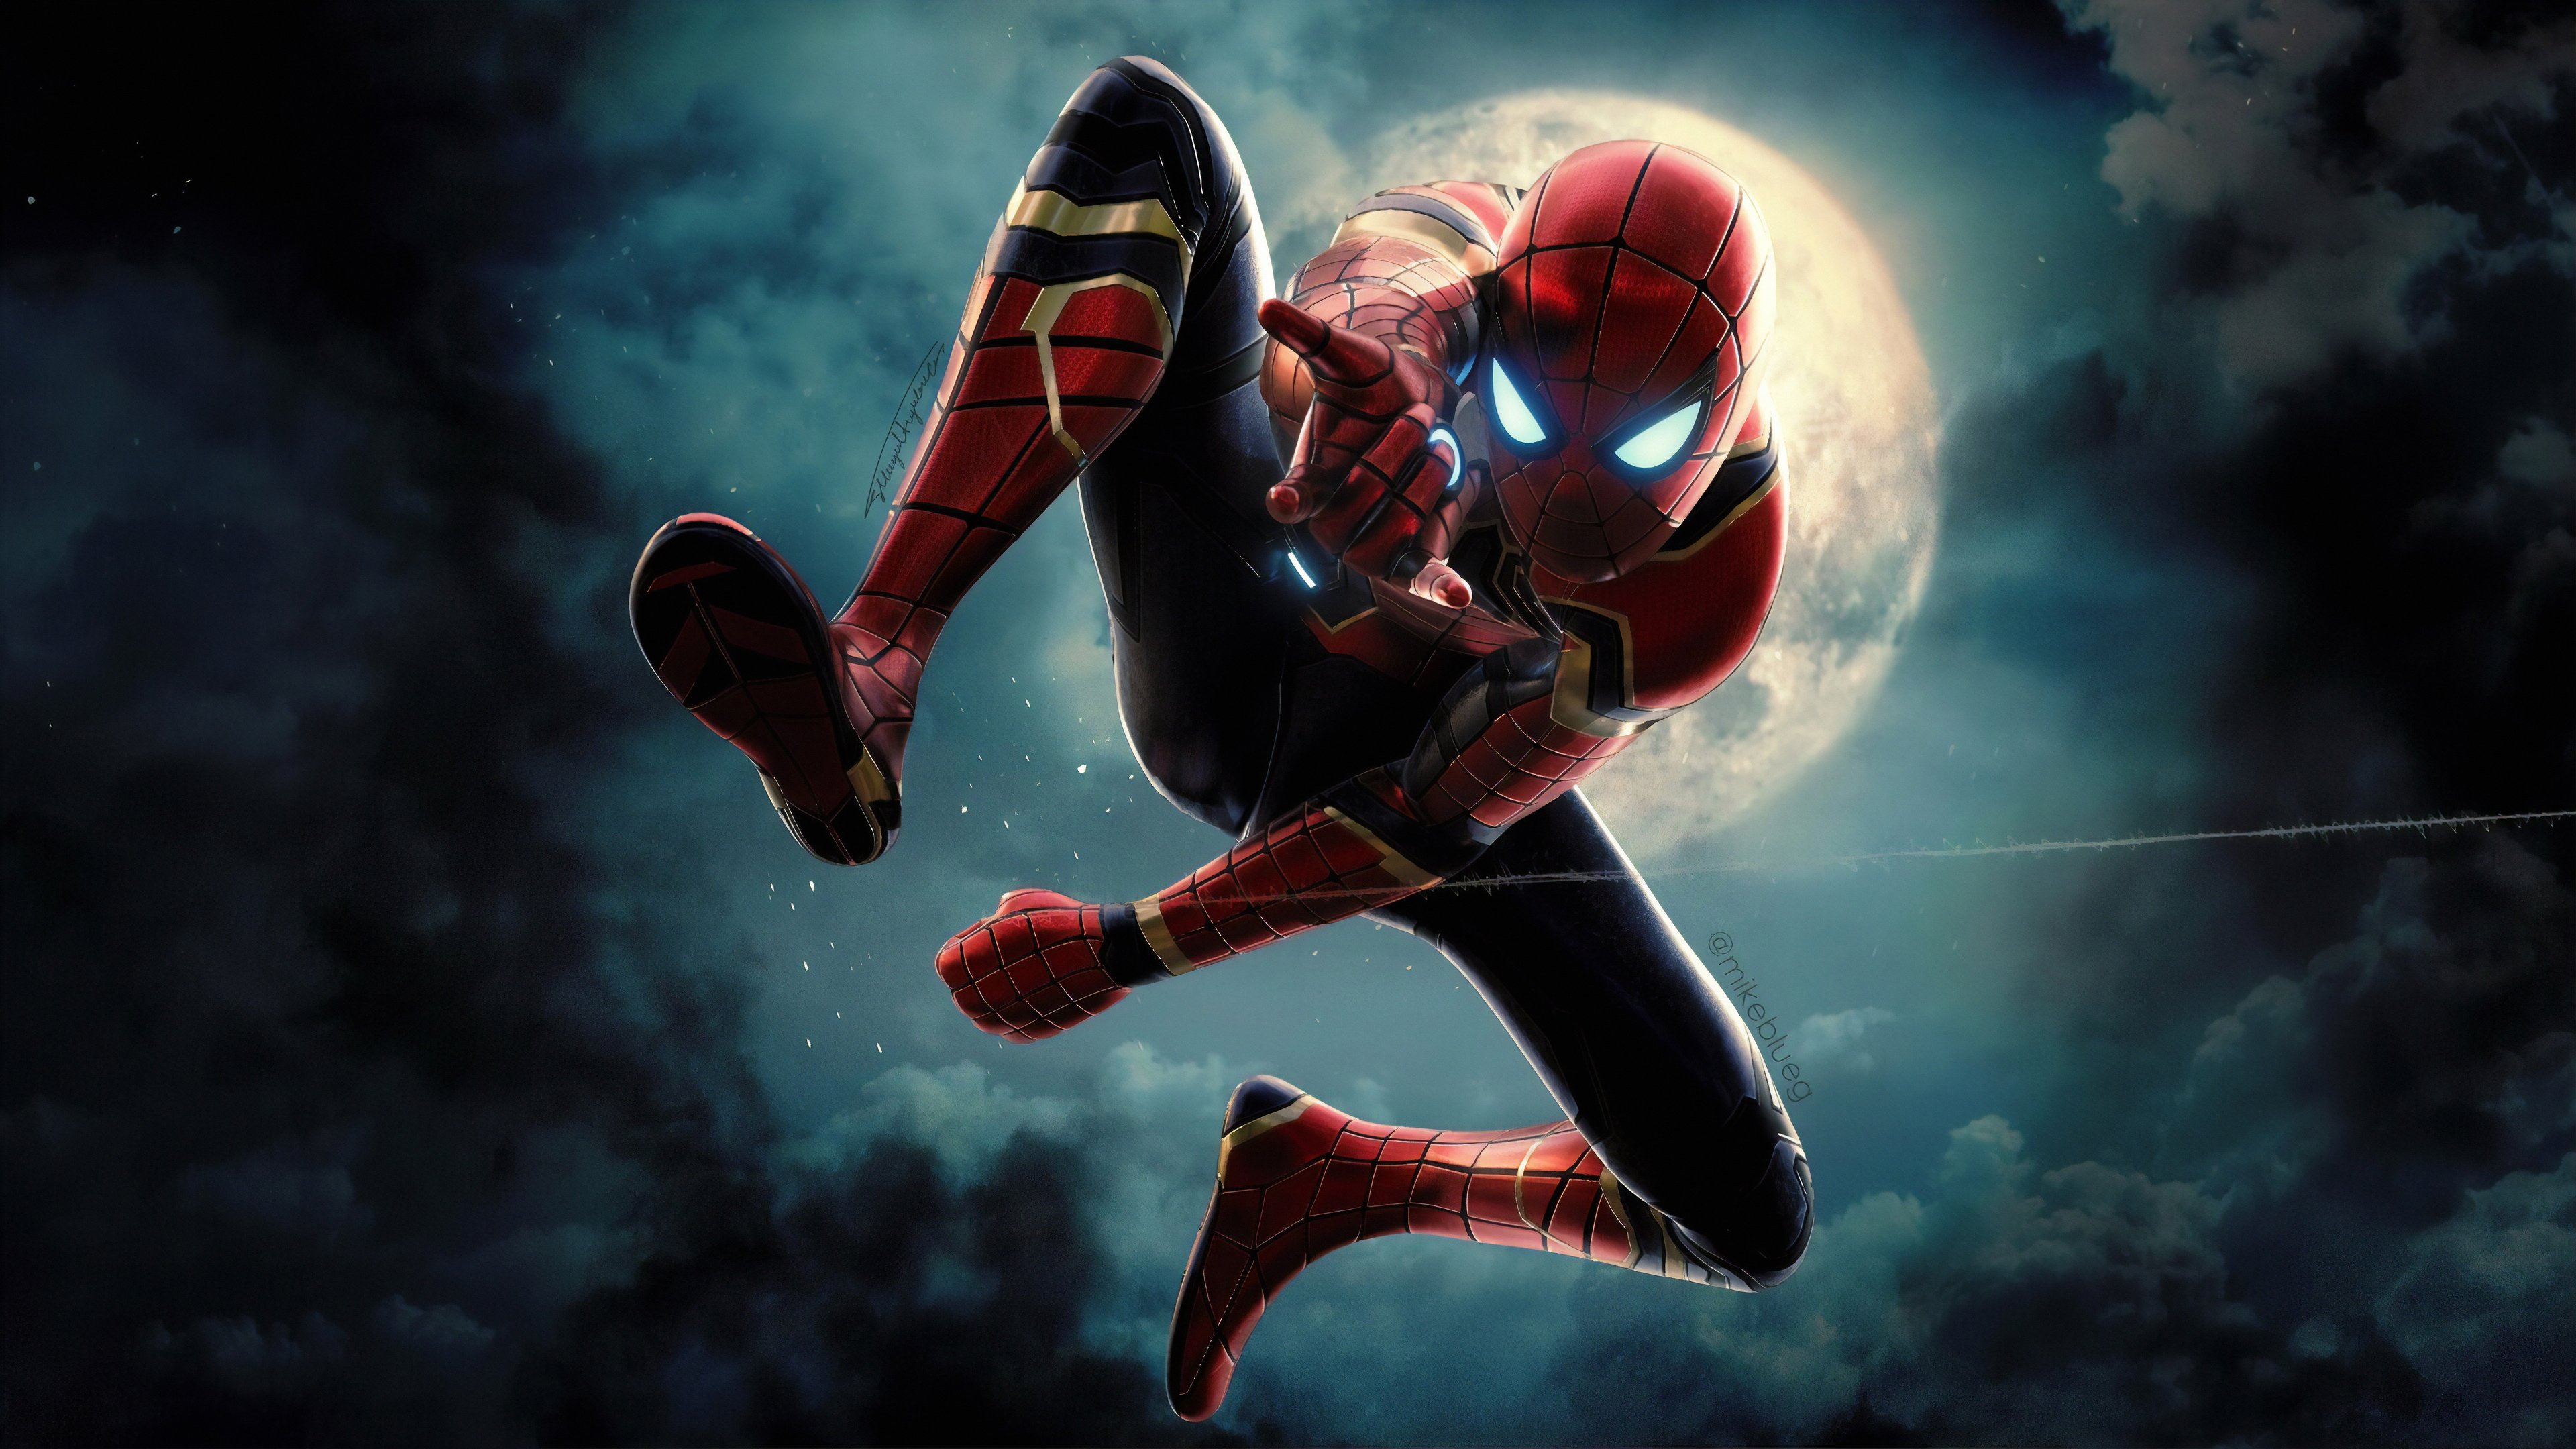 10 Perfect desktop wallpapers spiderman hd wallpaper 4k You Can Save It ...